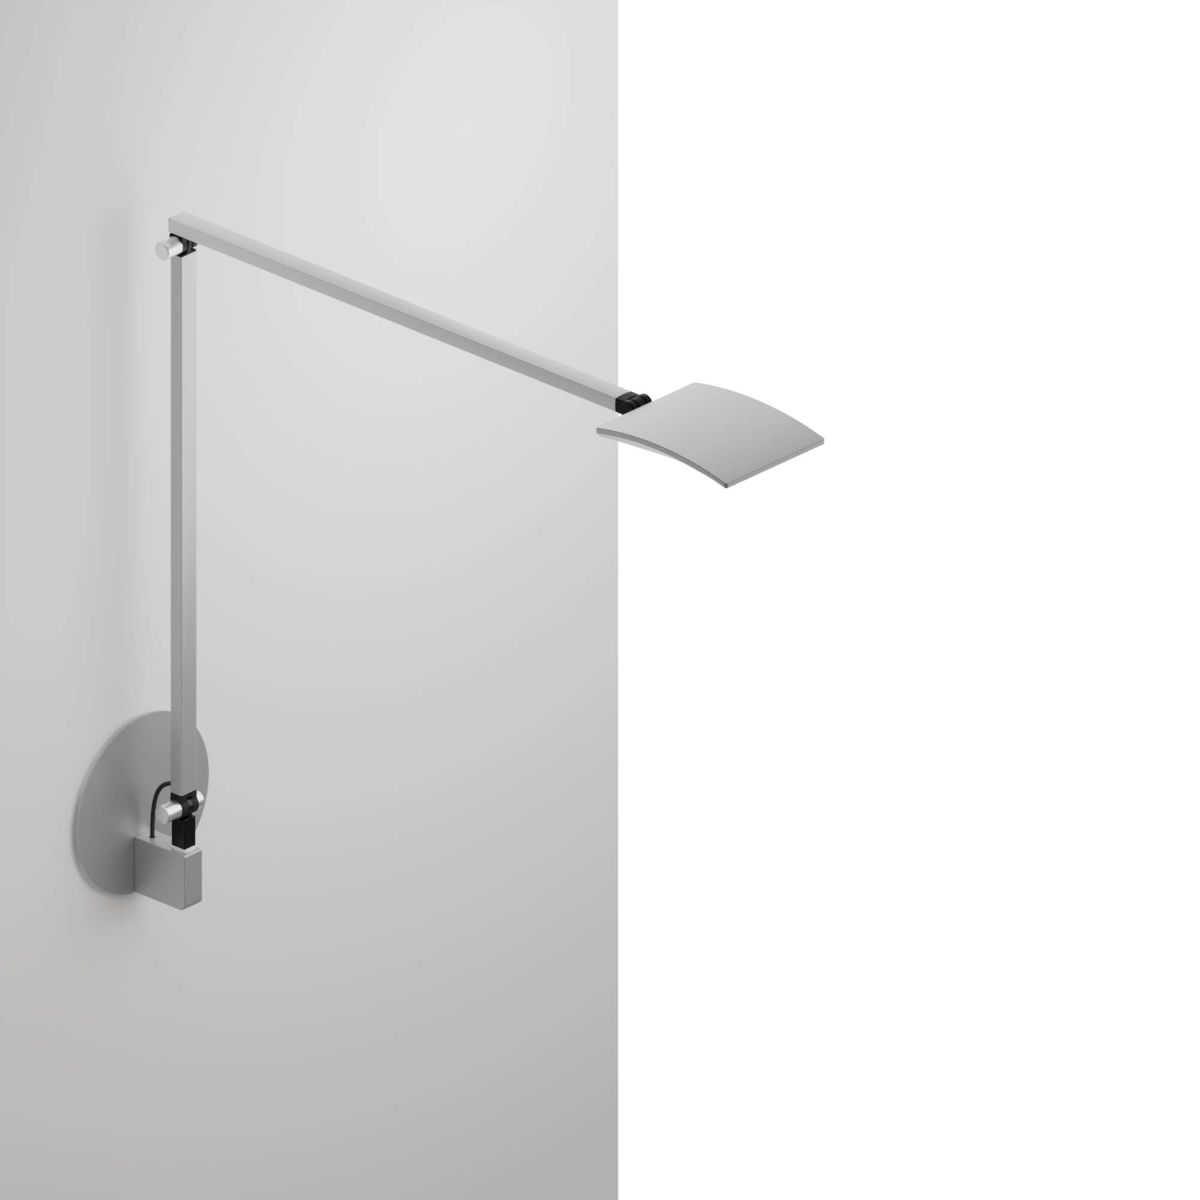 Mosso Pro Contemporary Hardwire Wall Mount LED Plug In Swing Arm Wall Lamp